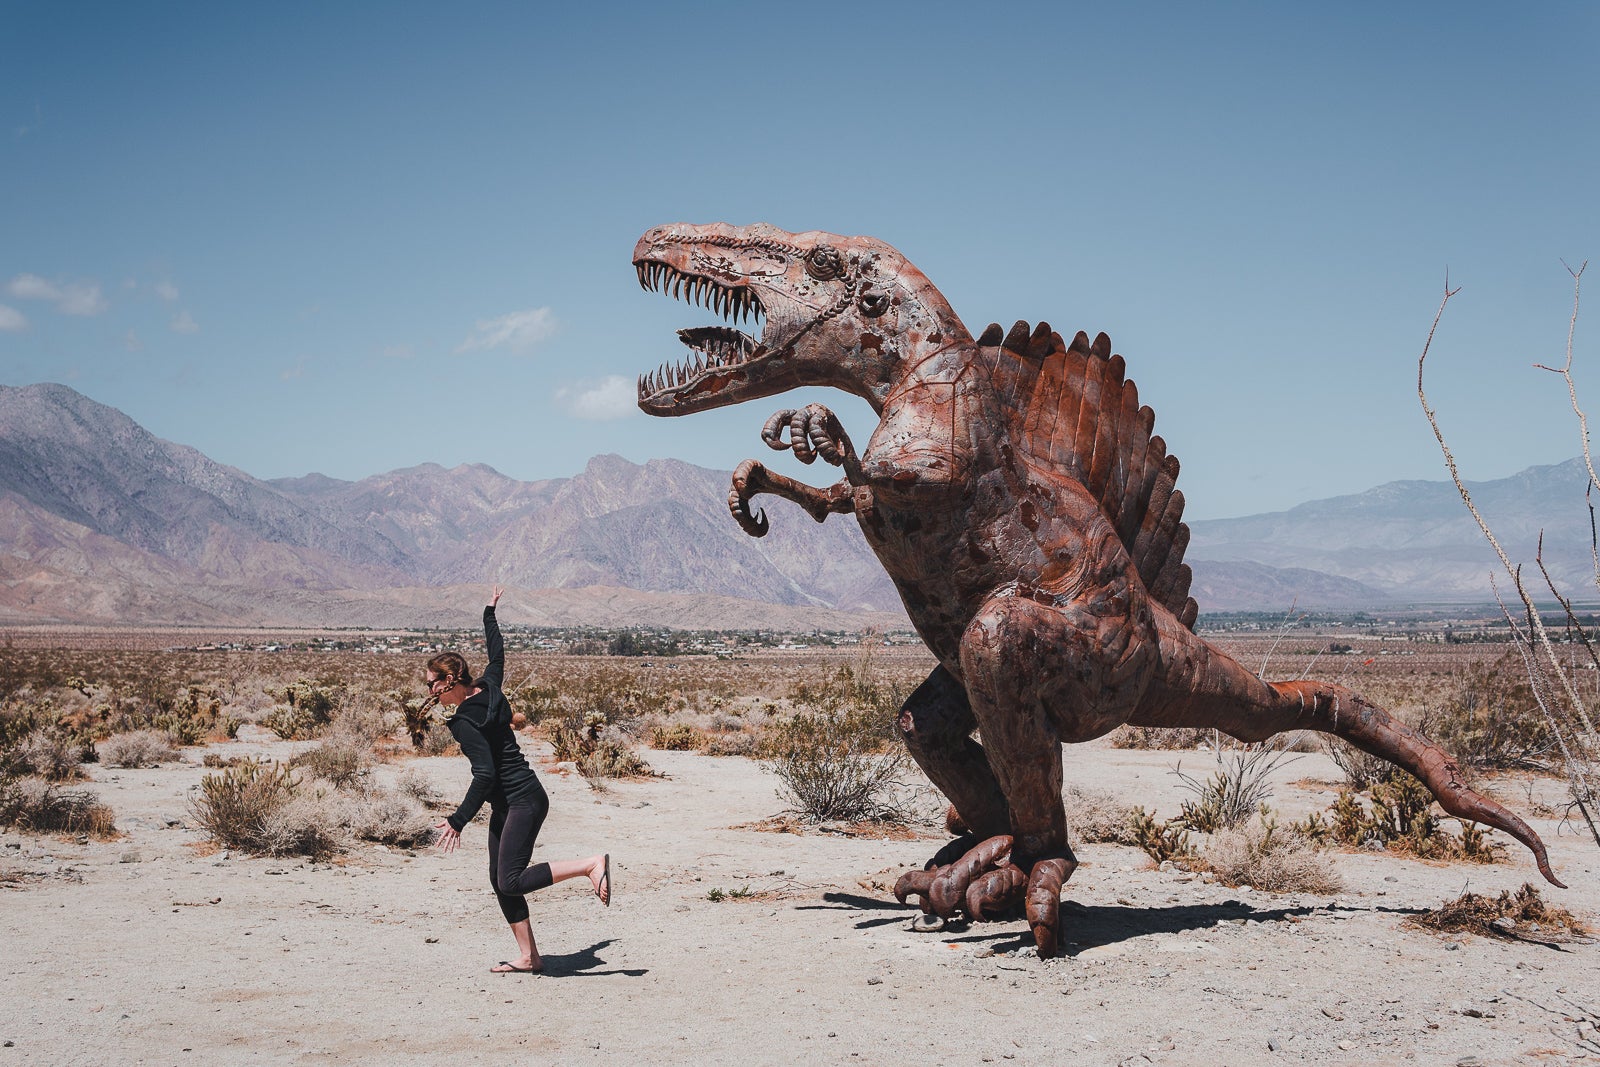 woman poses for photo running away from a dinosaur sculpture in the anza-borrego desert